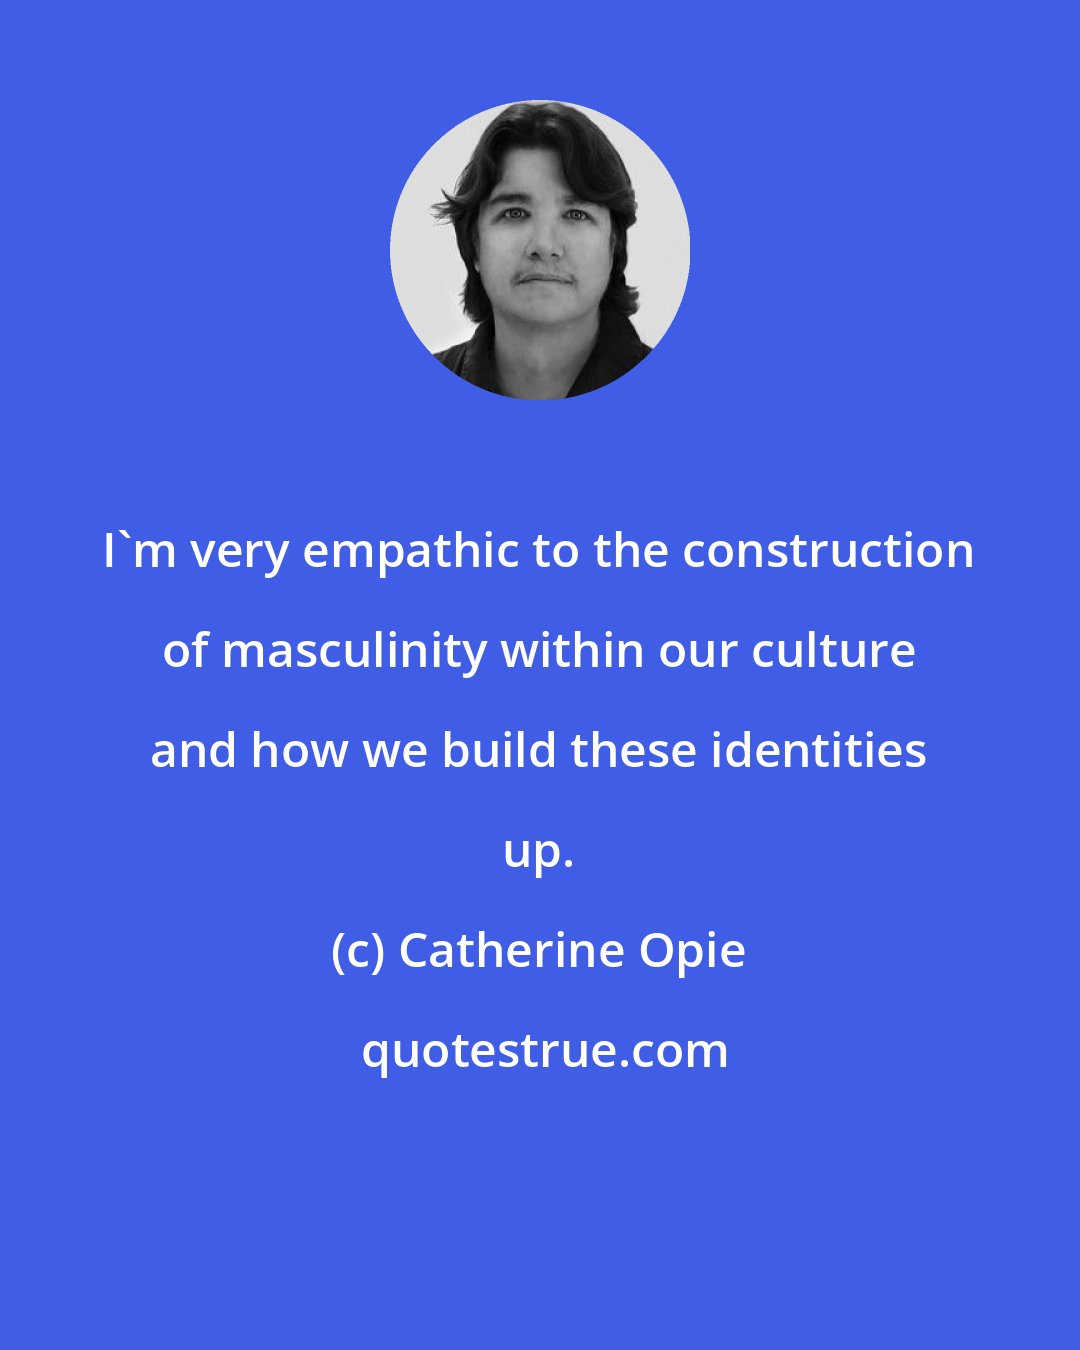 Catherine Opie: I'm very empathic to the construction of masculinity within our culture and how we build these identities up.